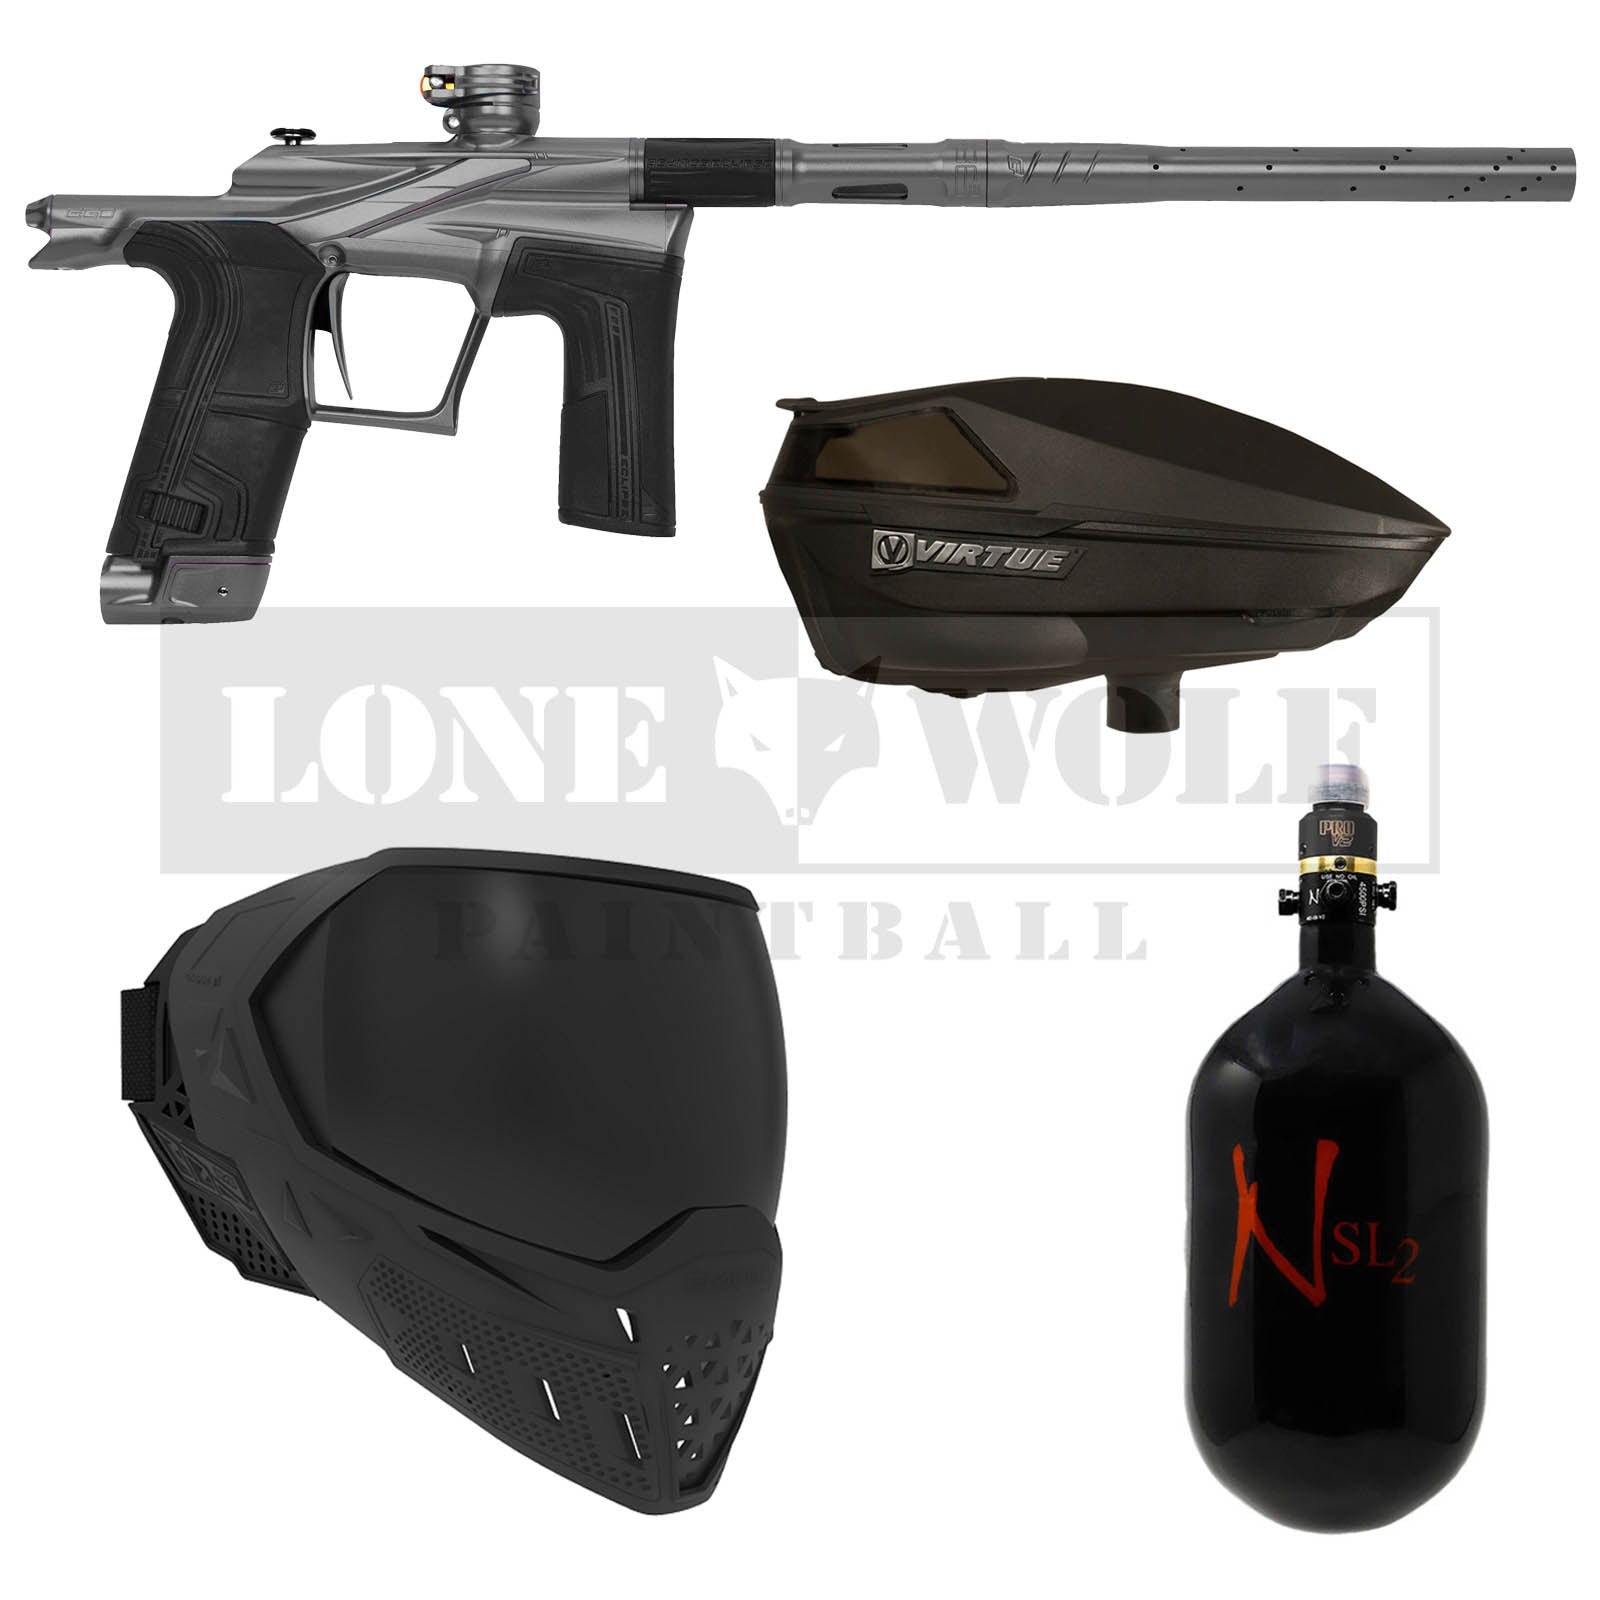 Planet Eclipse EGO LV2 Tournament Package – Lone Wolf Paintball